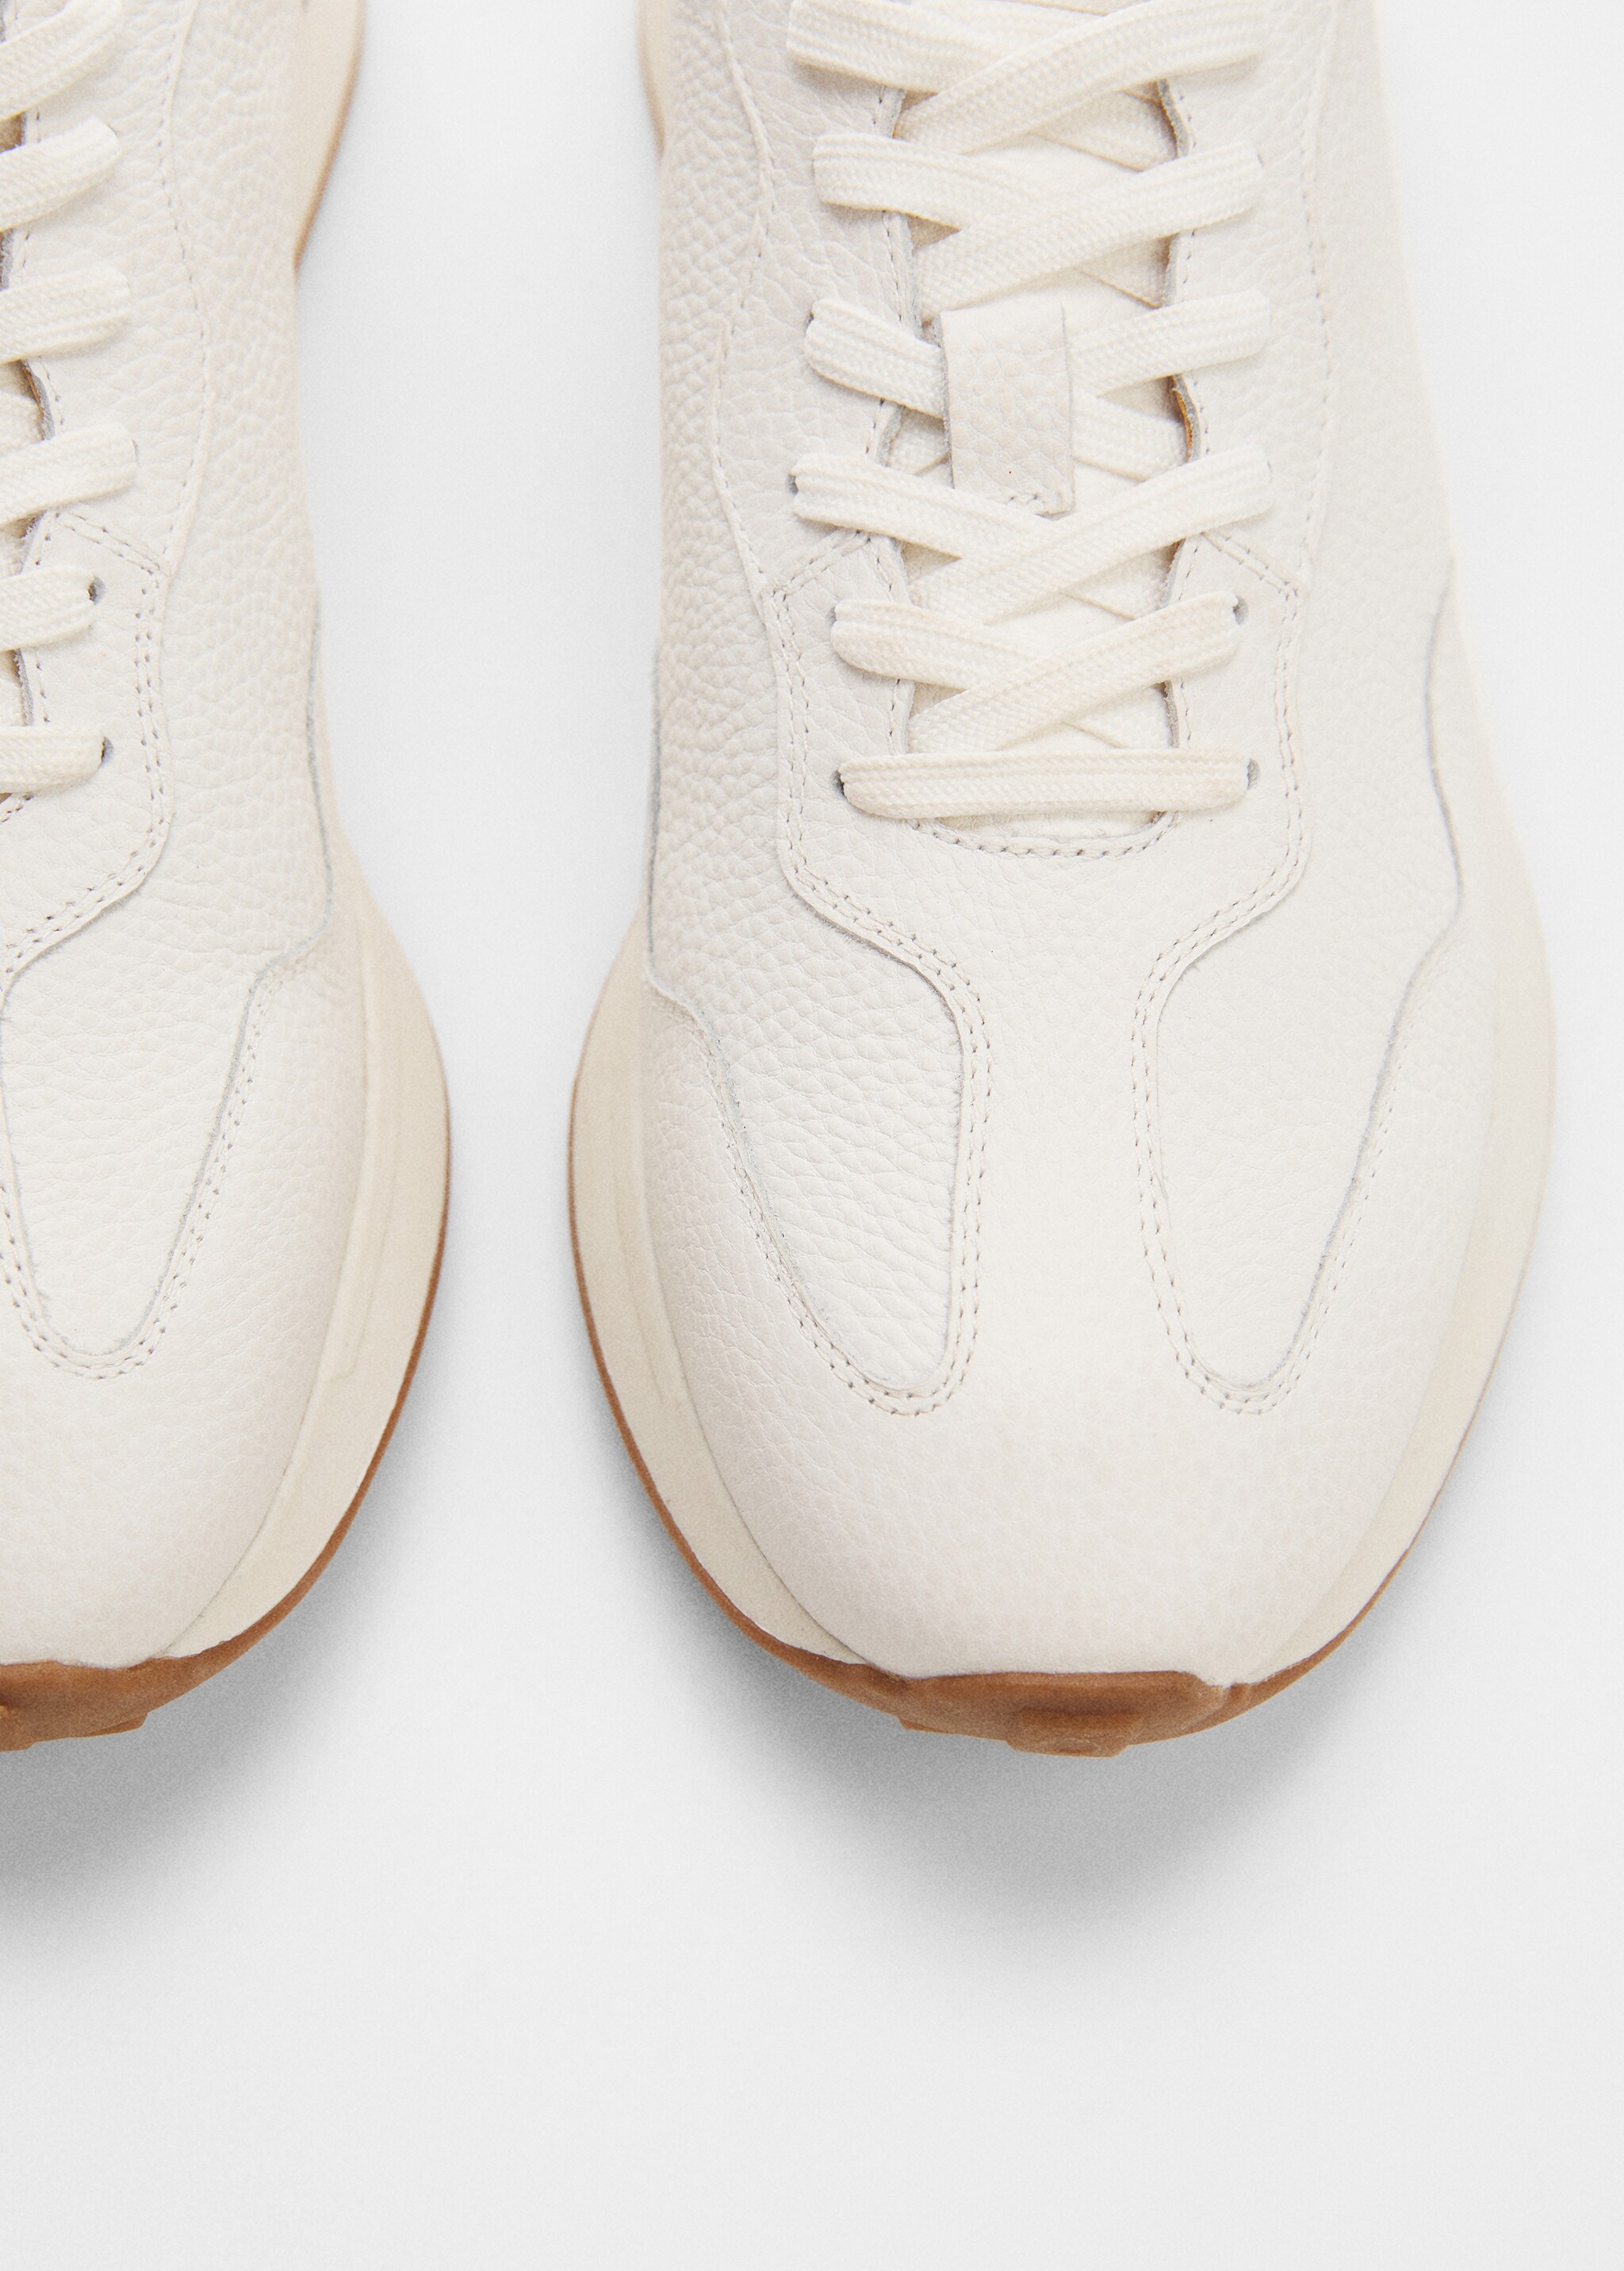 Stitched sneakers - Details of the article 2